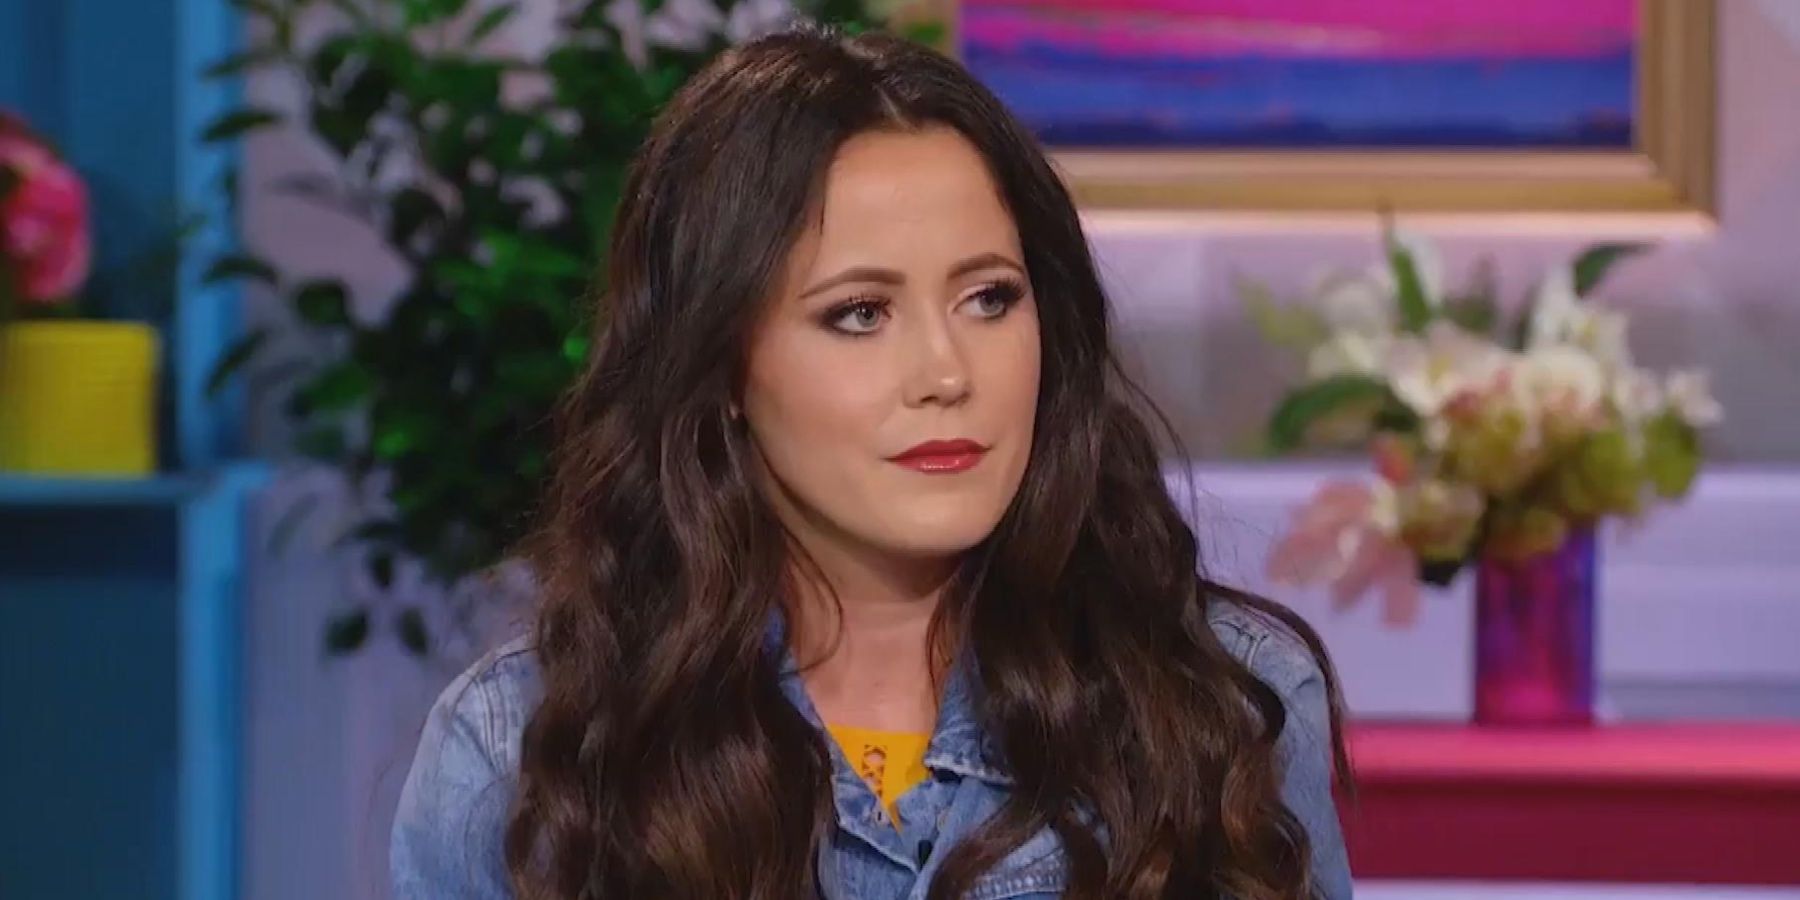 Teen Mom: Jenelle’s Cosmetics Business Folds After Customer Complaints